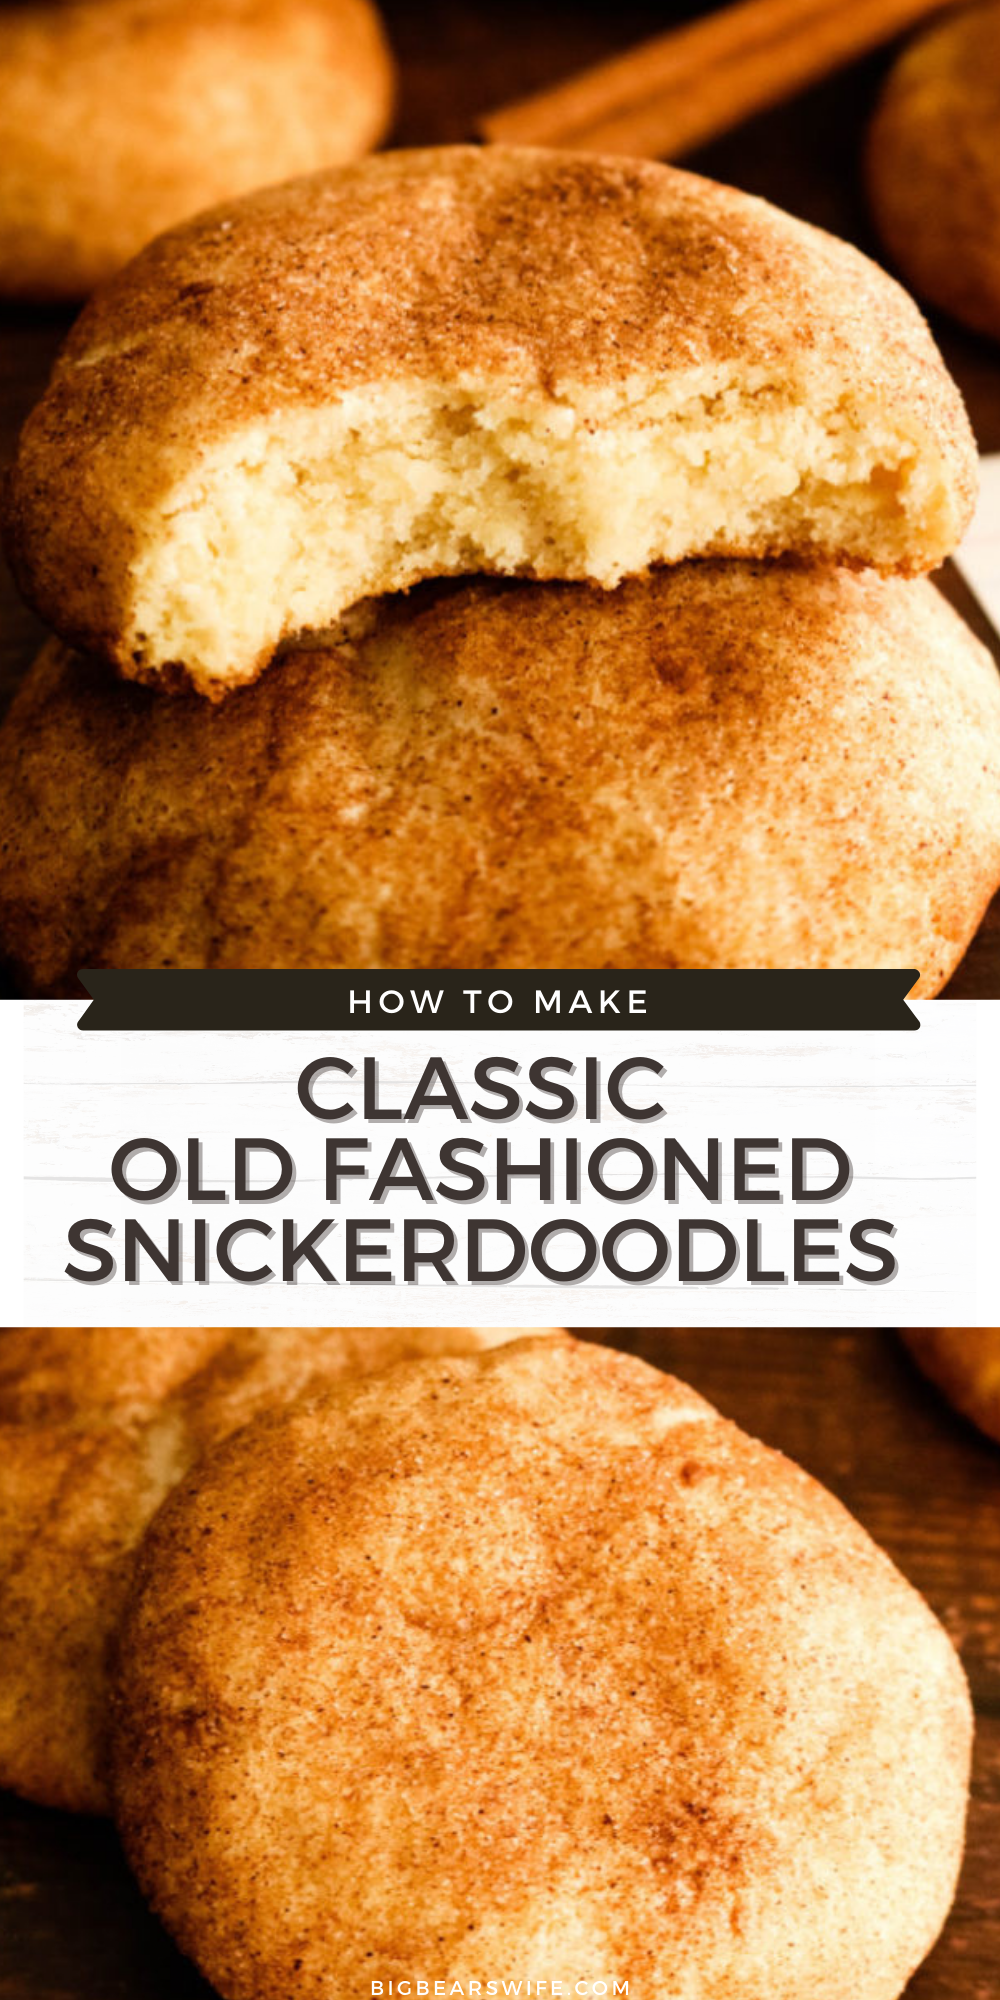 Classic Old Fashioned Snickerdoodles need to be a part of everyone's recipe box! Made with shortening and rolled in cinnamon sugar for a classic sweet bite!  via @bigbearswife